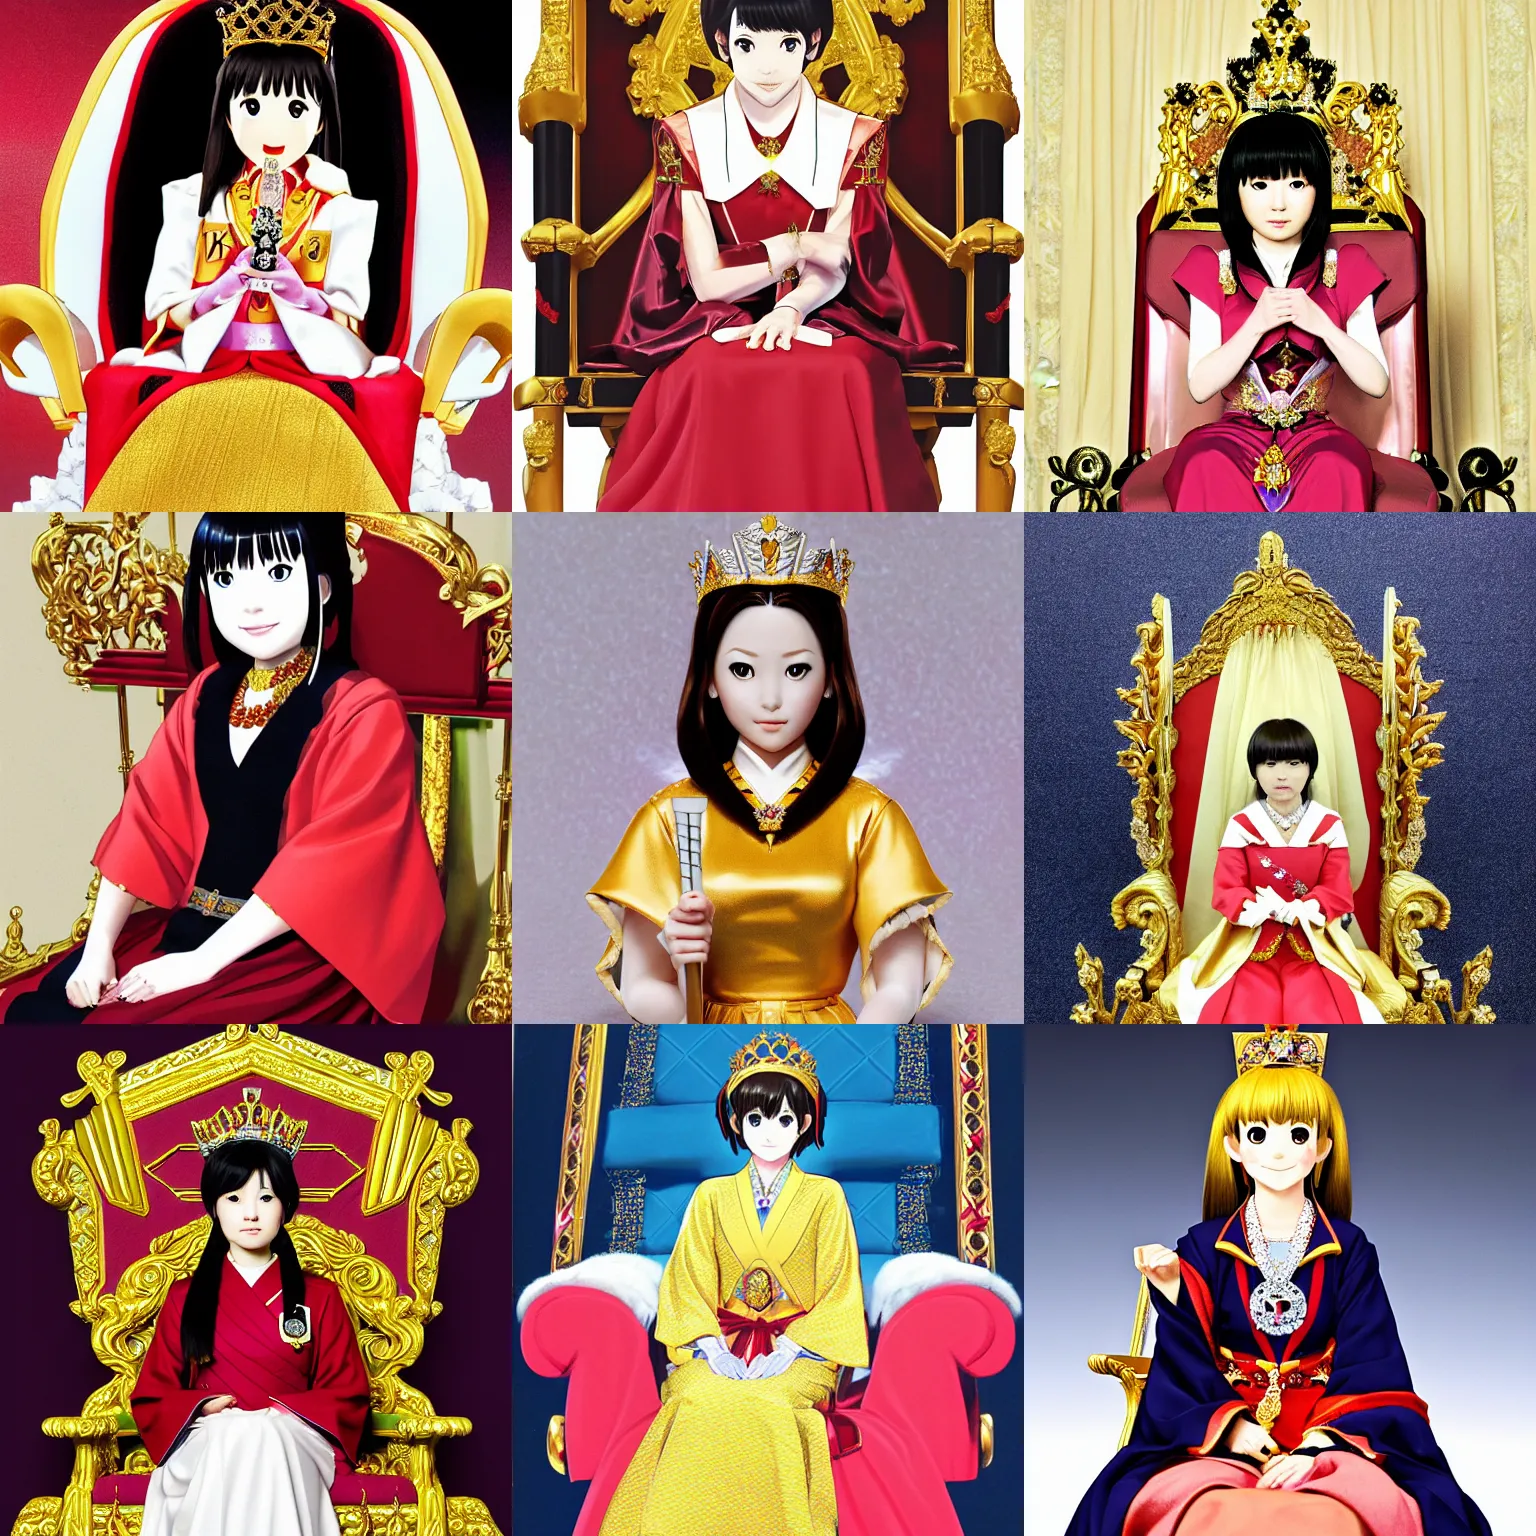 Prompt: regal yui hiwasawa from k-on sitting on queens throne royalty wearing royal mantle gold jewelry by alex ross